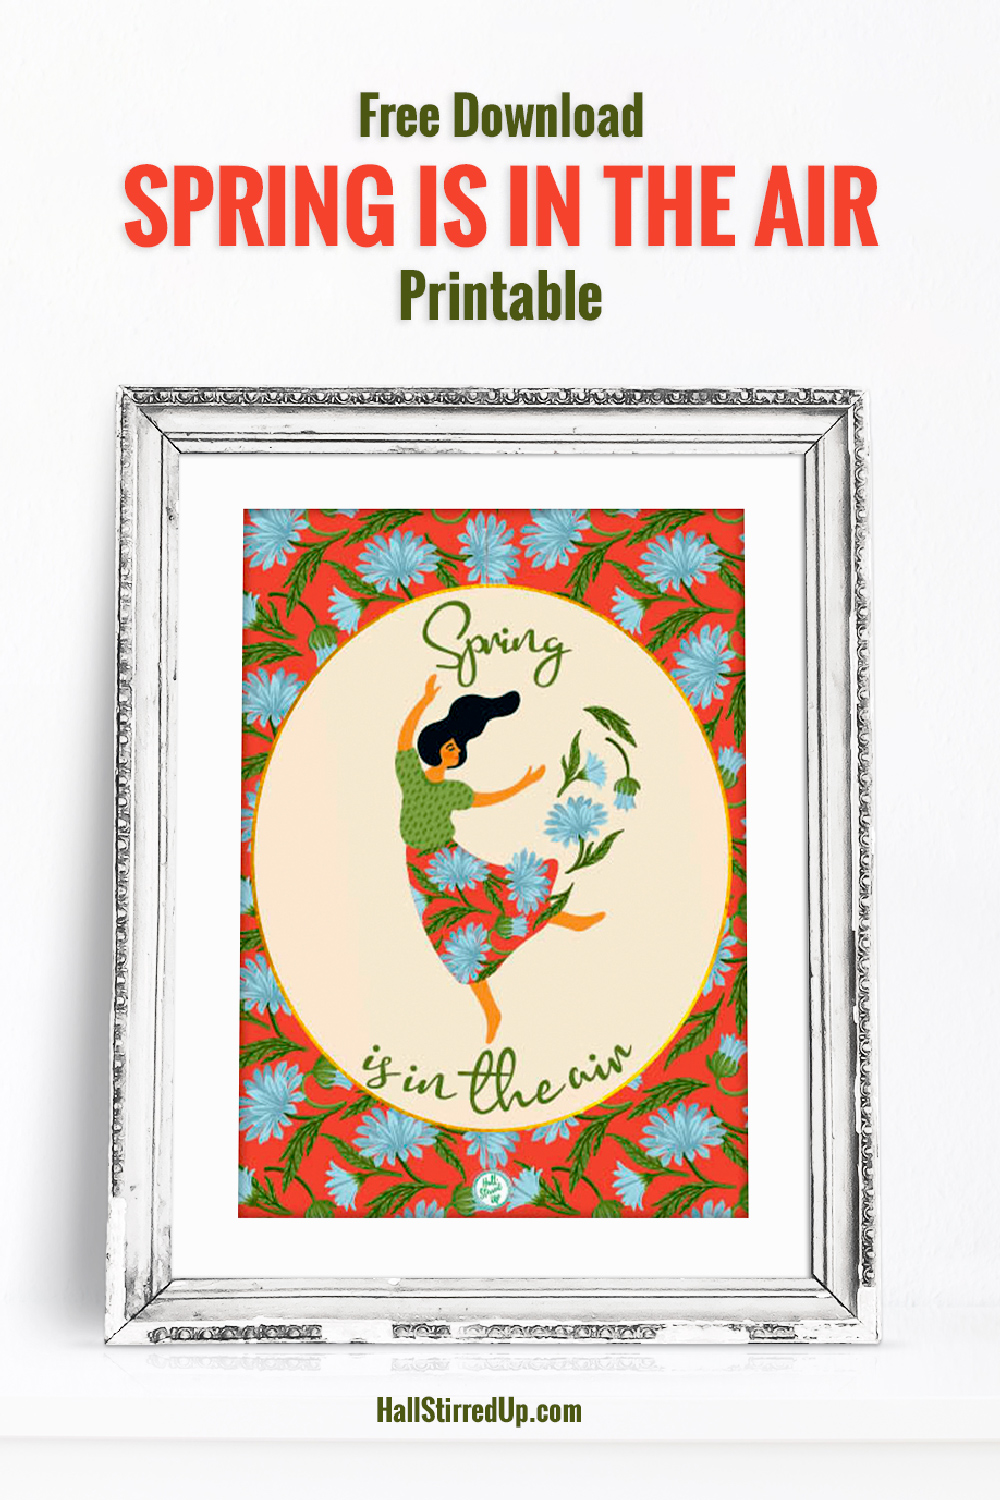 Spring is in the air and includes a fun free printable